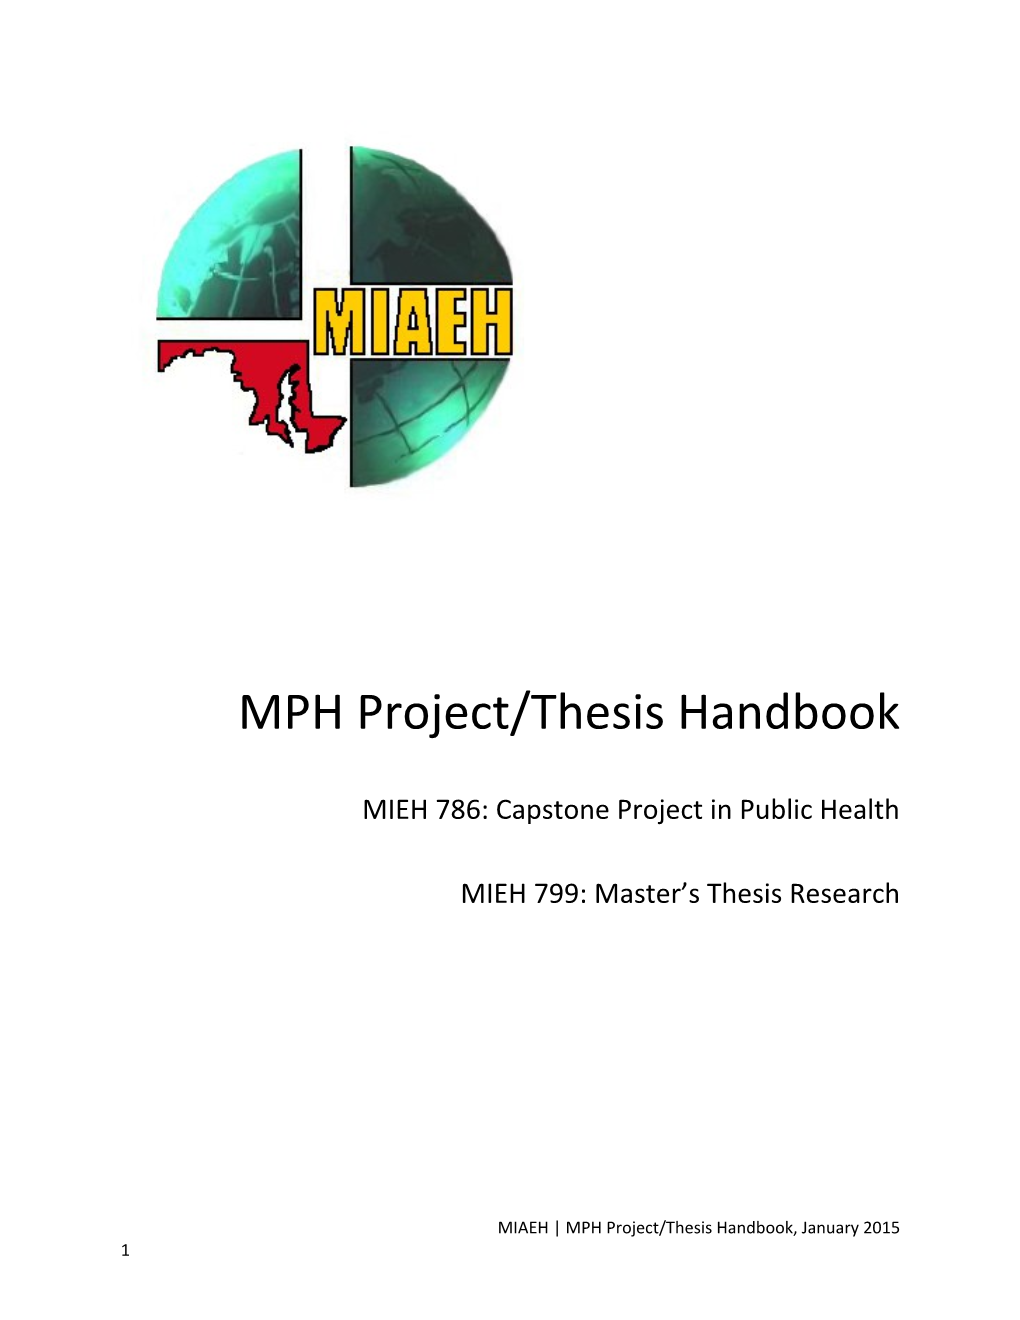 MPH Project/Thesis Handbook